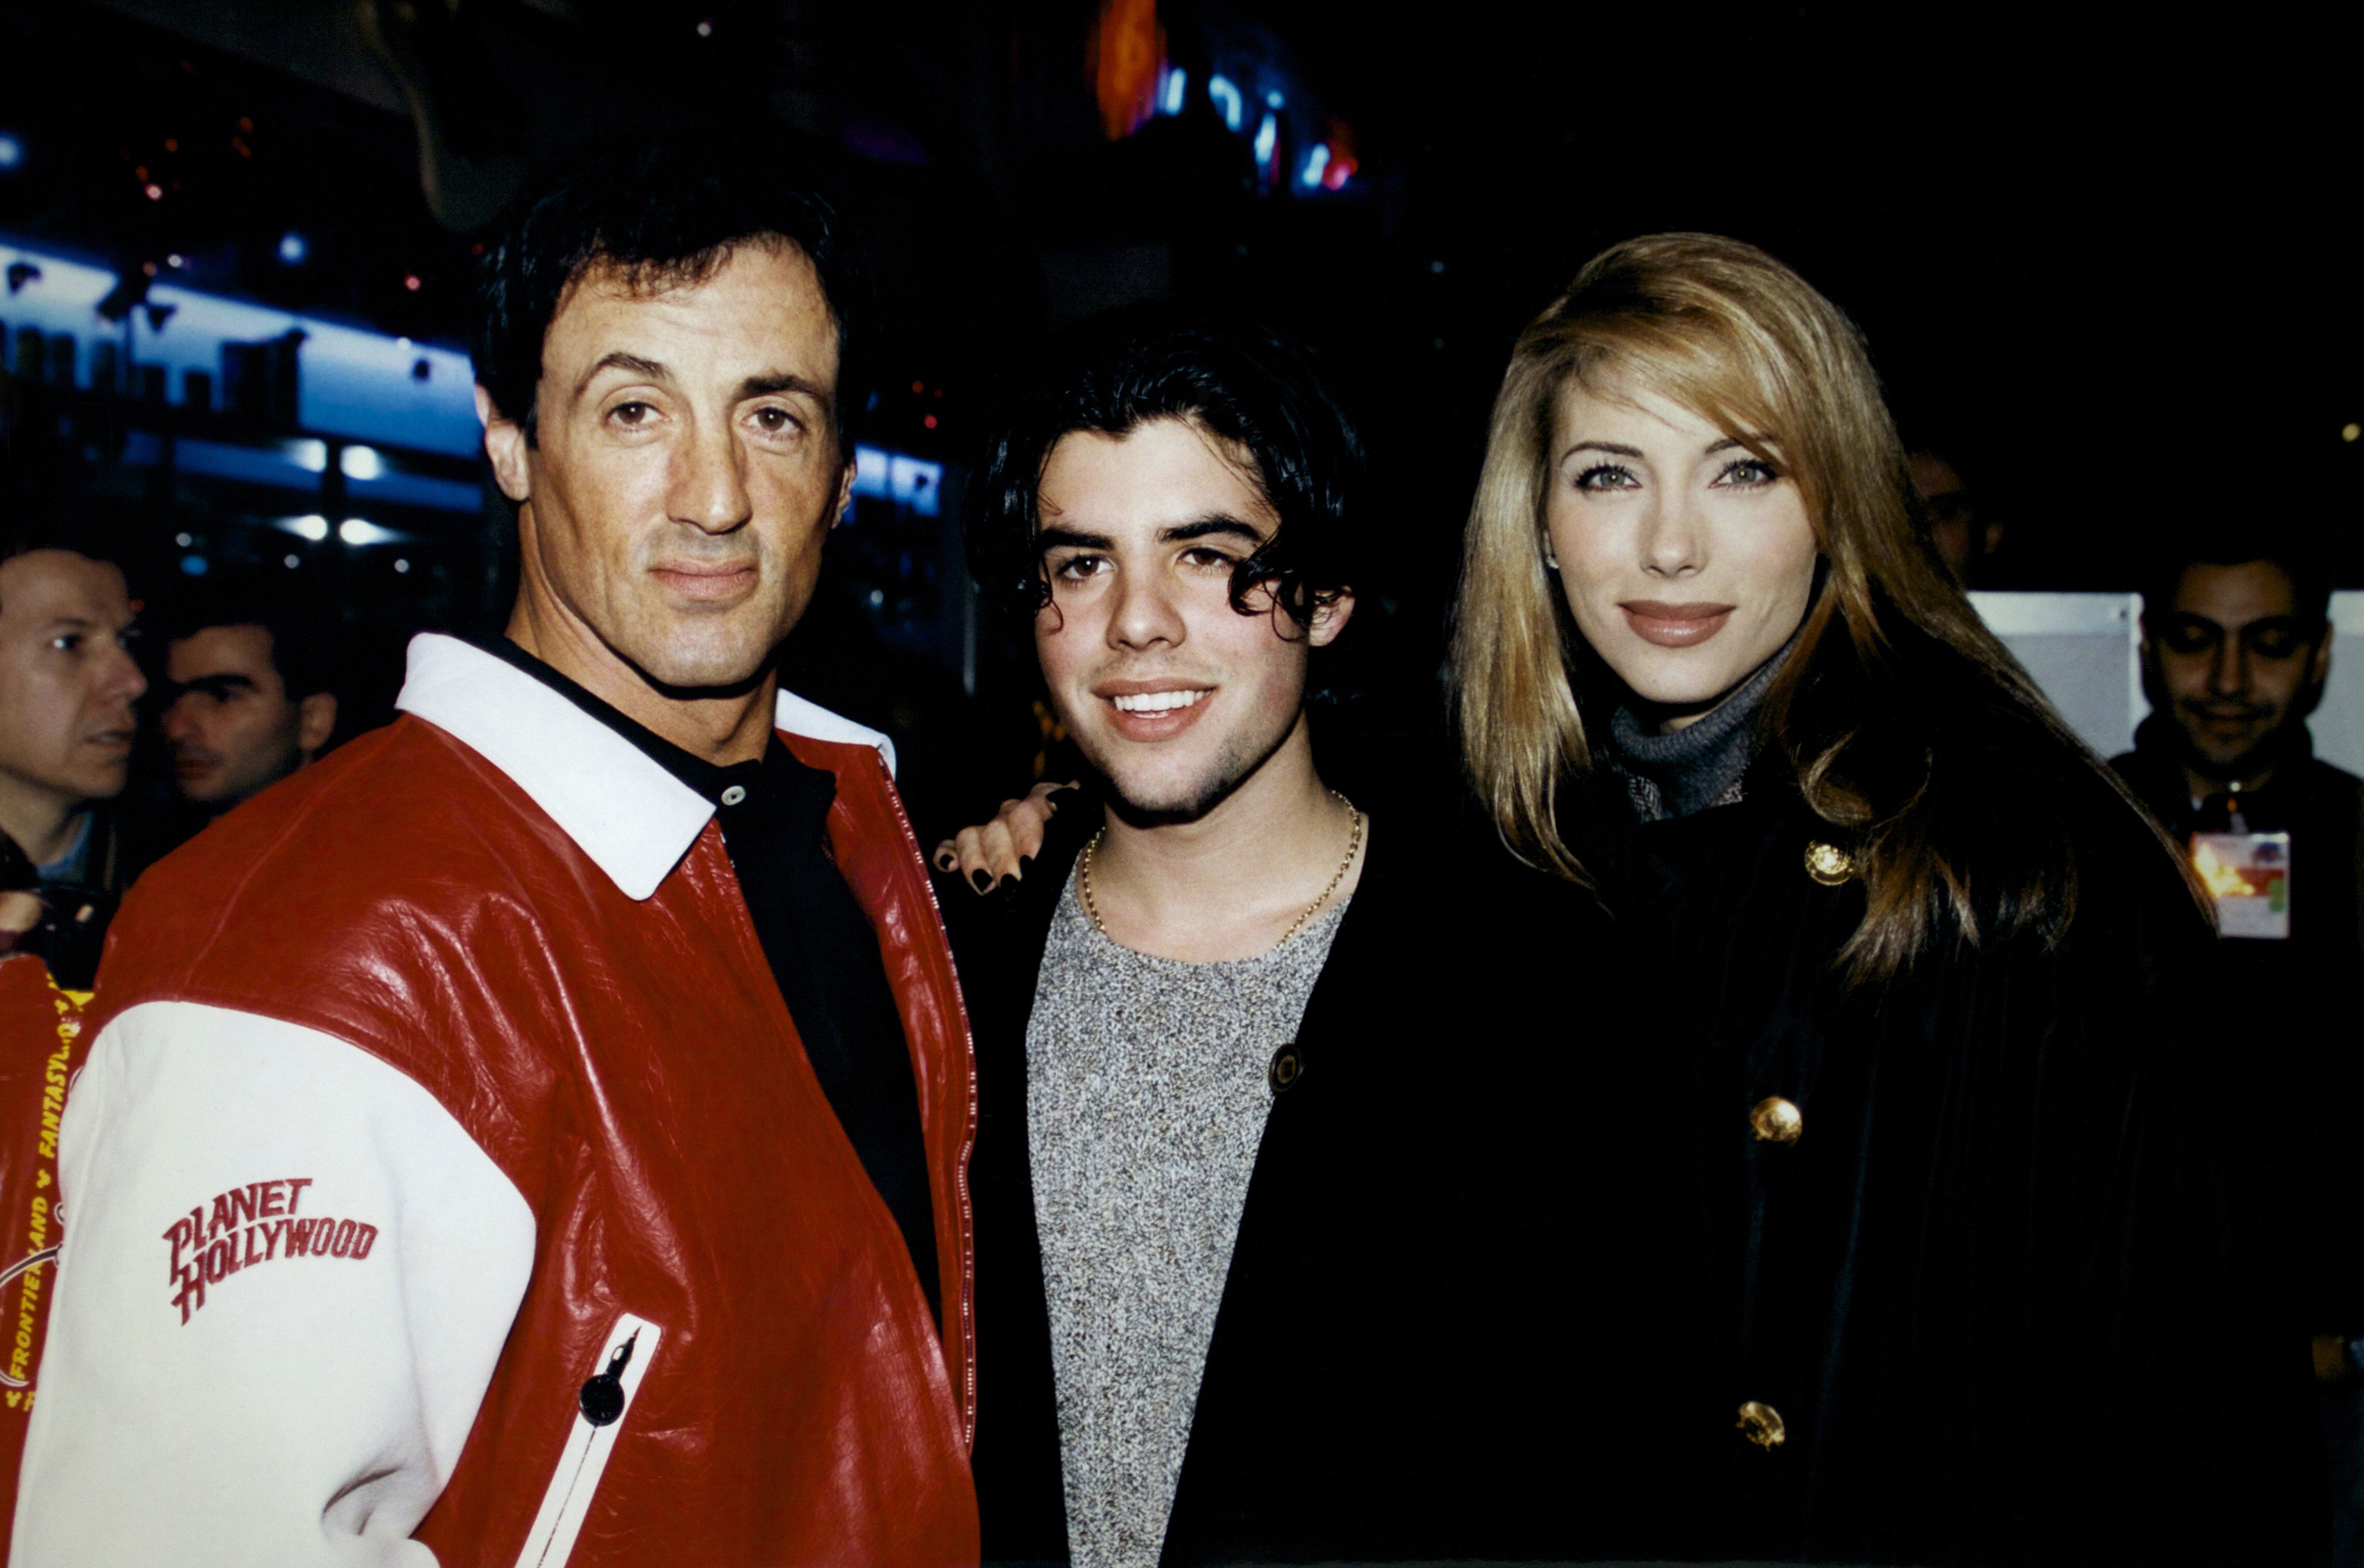 Sylvester Stallone, Sage Stallone, and Jennifer Flavin at the grand opening of Planet Hollywood restaurant on November 25, 1995 | Source: Getty Images